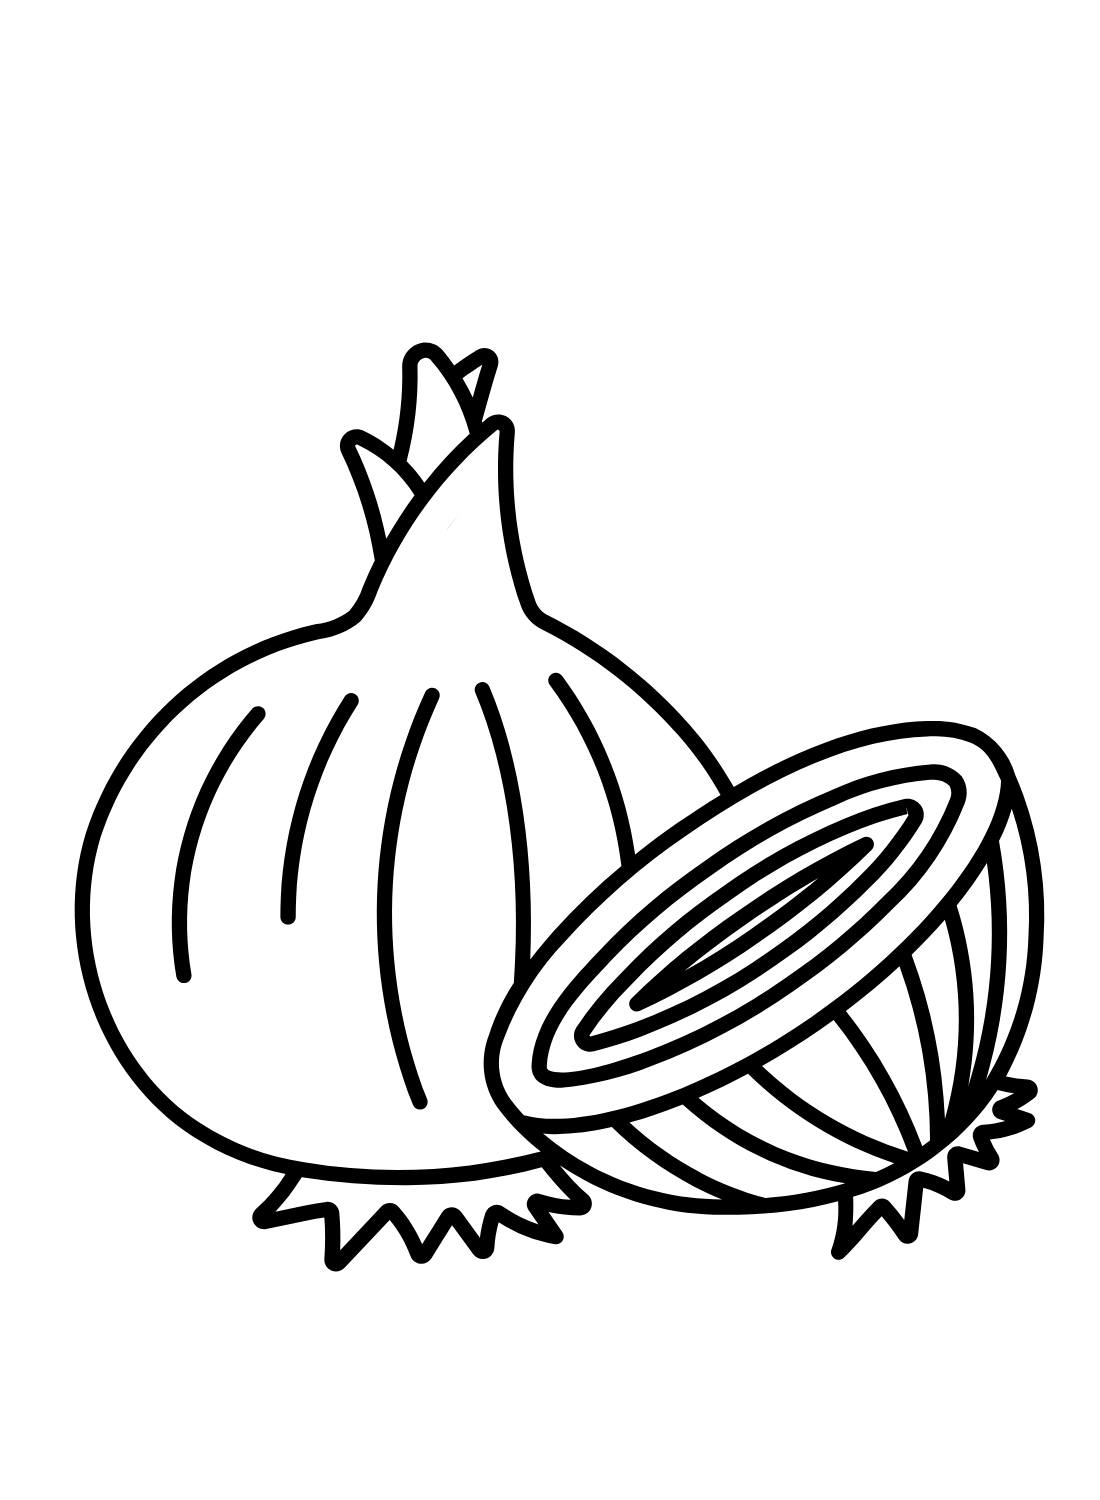 Onion Images Free from Onion